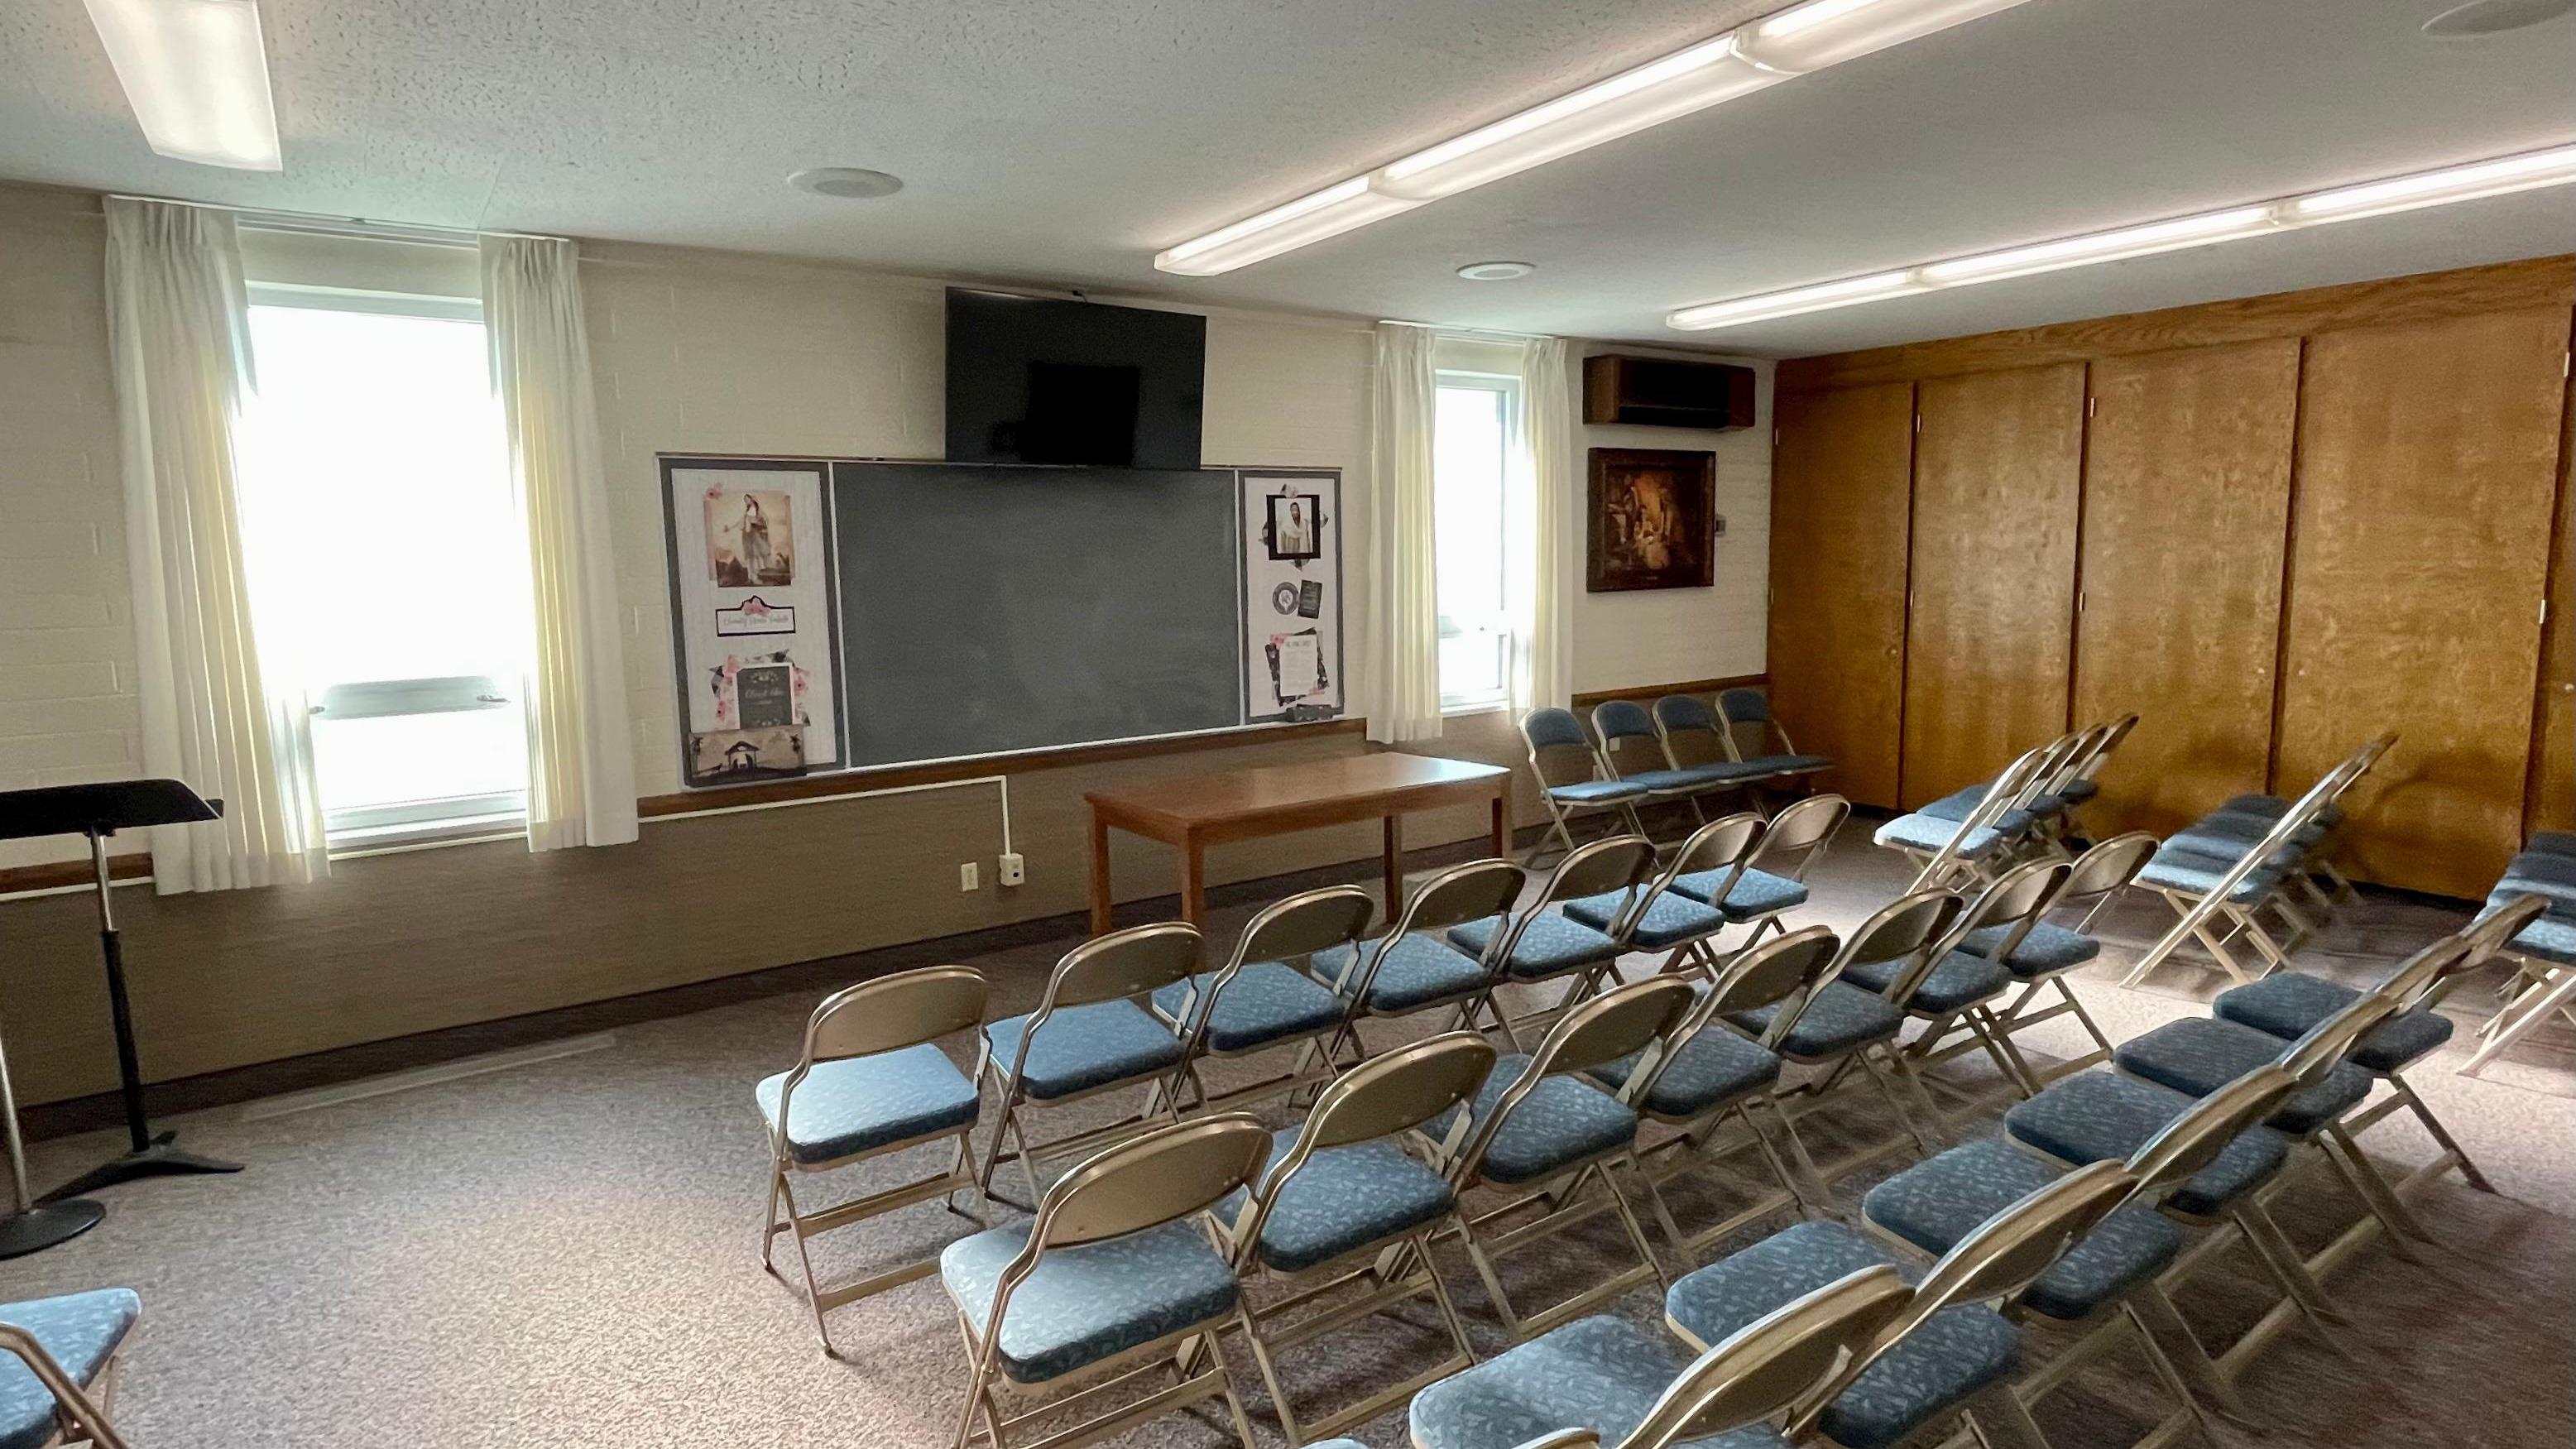 Room where the women meet to have lessons and discus gospel subjects.